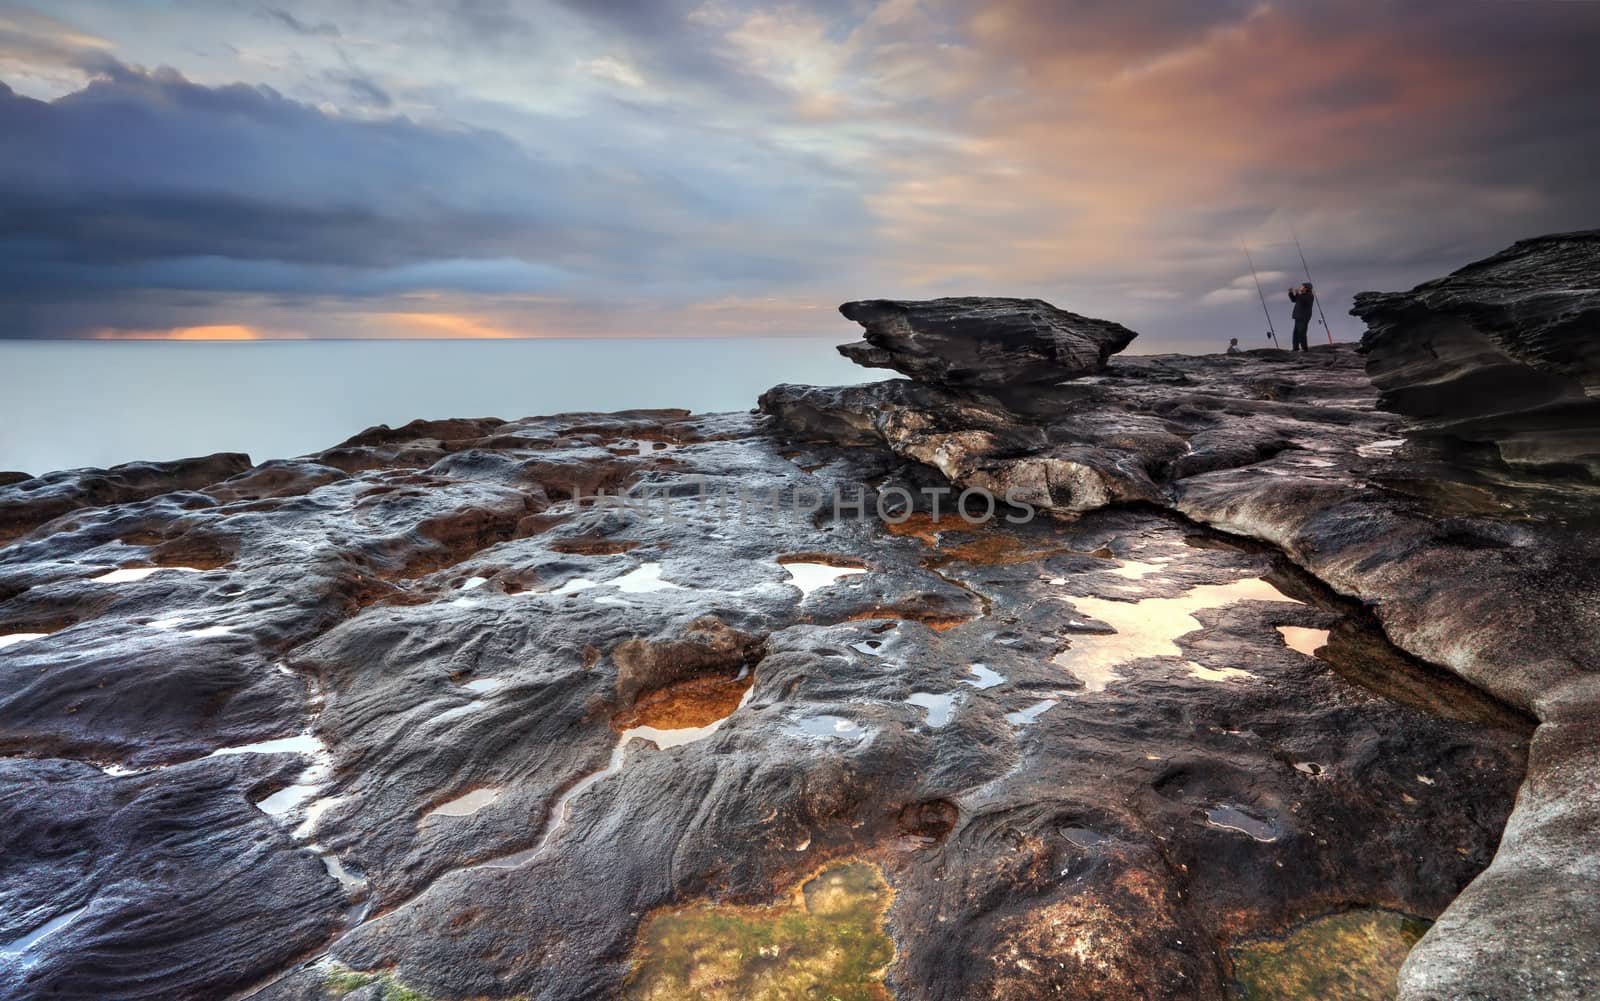 The view south from South Curl Curl rocks, NSW Australia.   The rock really grabbed my eye and this was where the most colour concentration from sunrise was warming up the stormy clouds.  A fisherman clenches fists in jubilation.